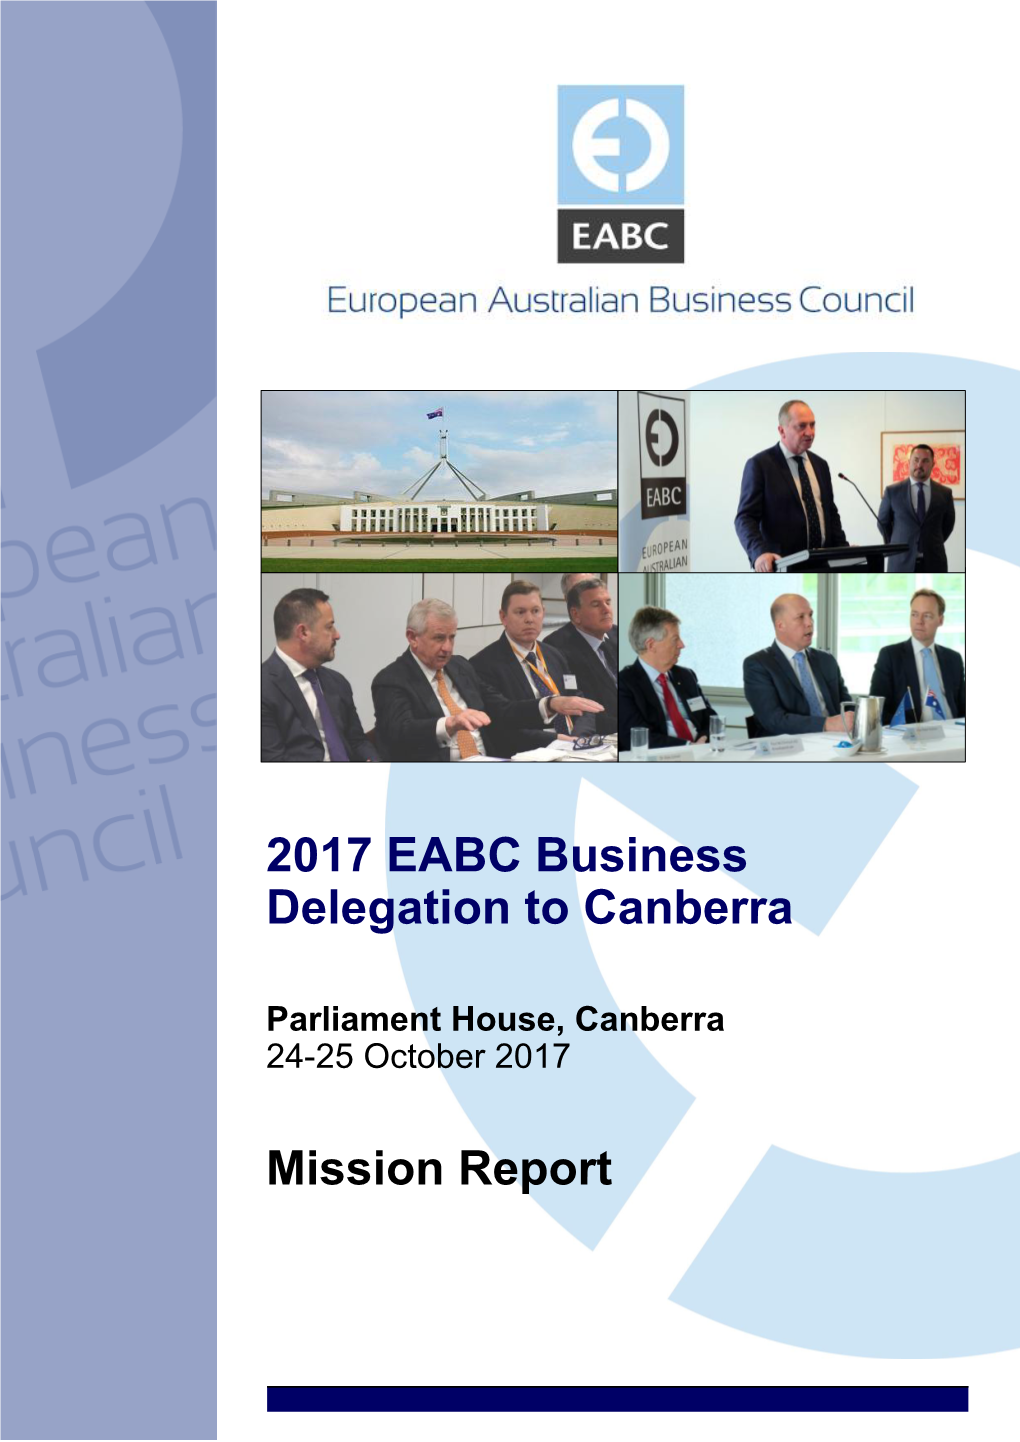 2017 EABC Business Delegation to Canberra Mission Report